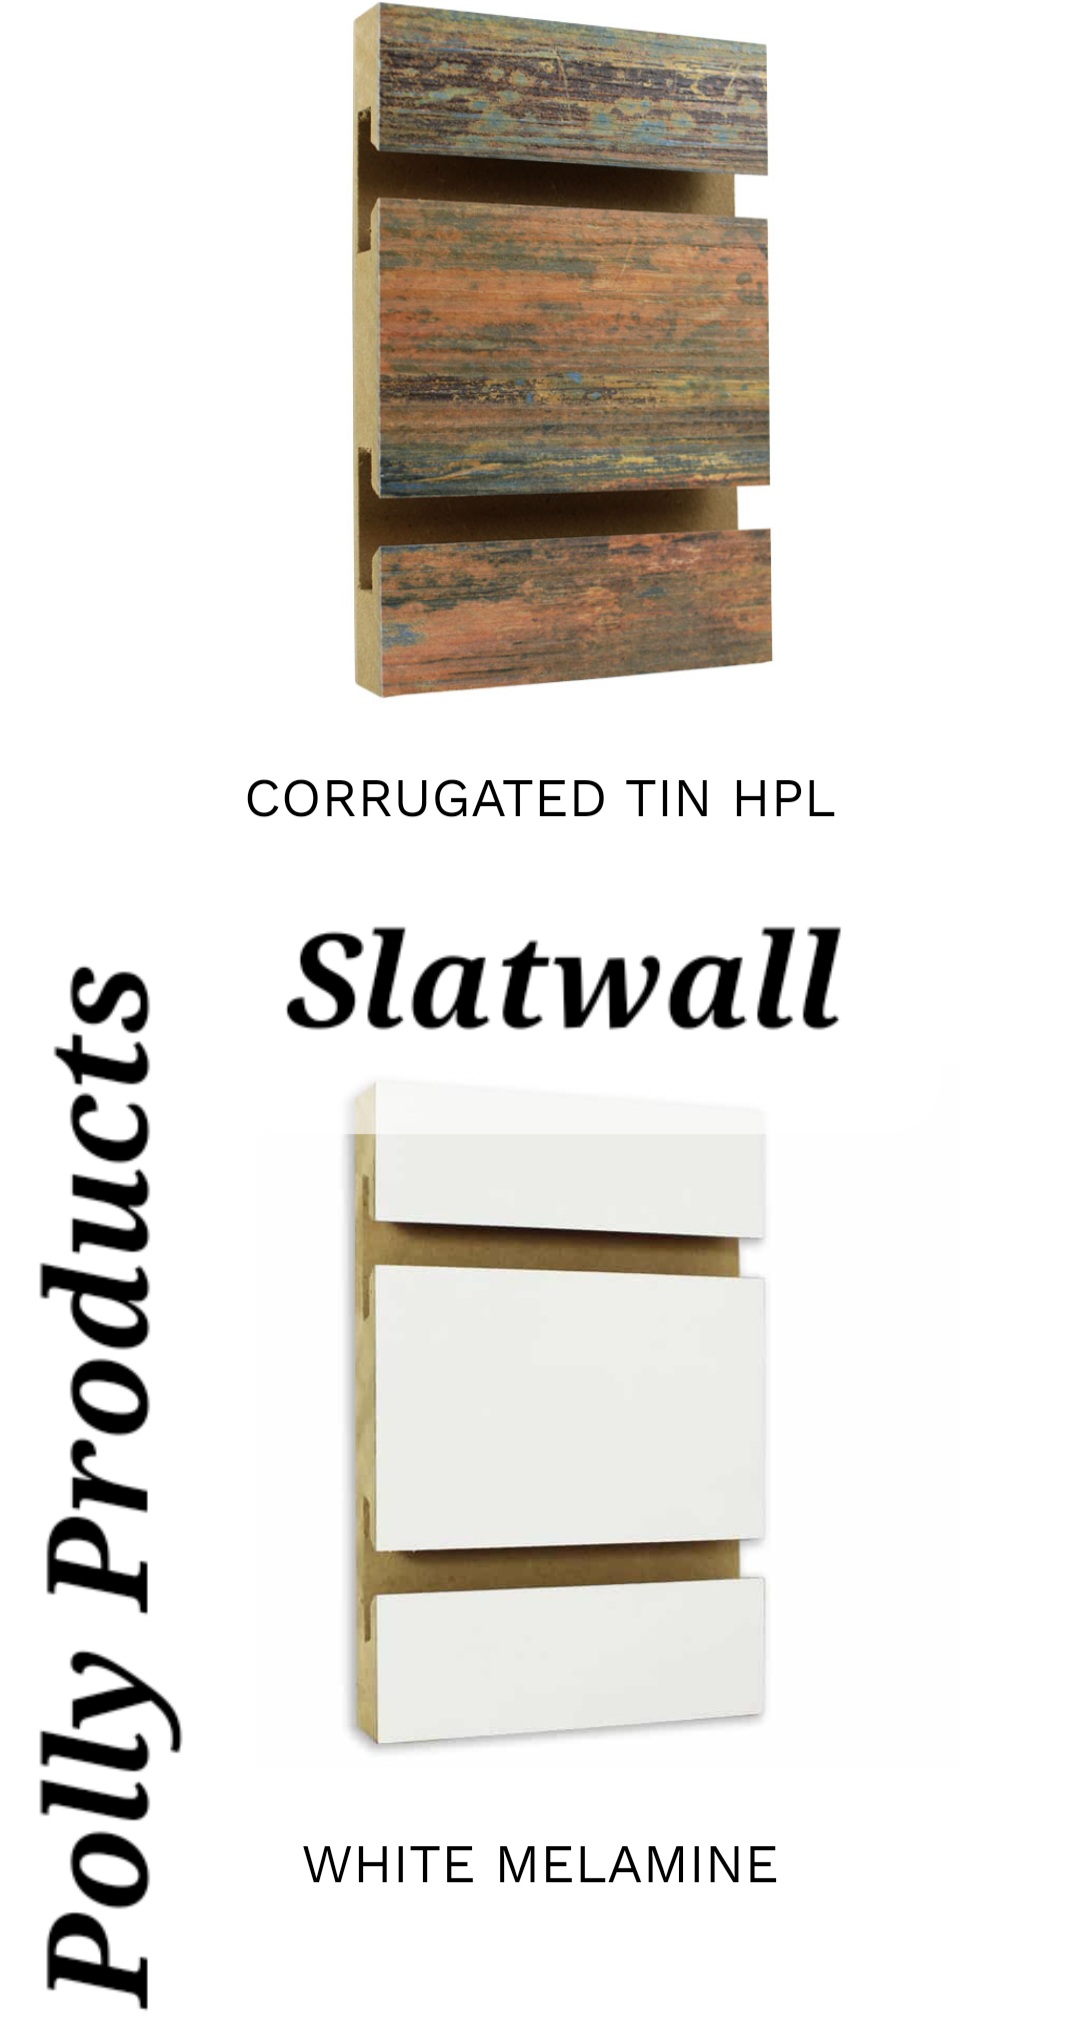 POLLY PRODUCTS SLATWALL Creative. MADE IN THE USA QUALITY 